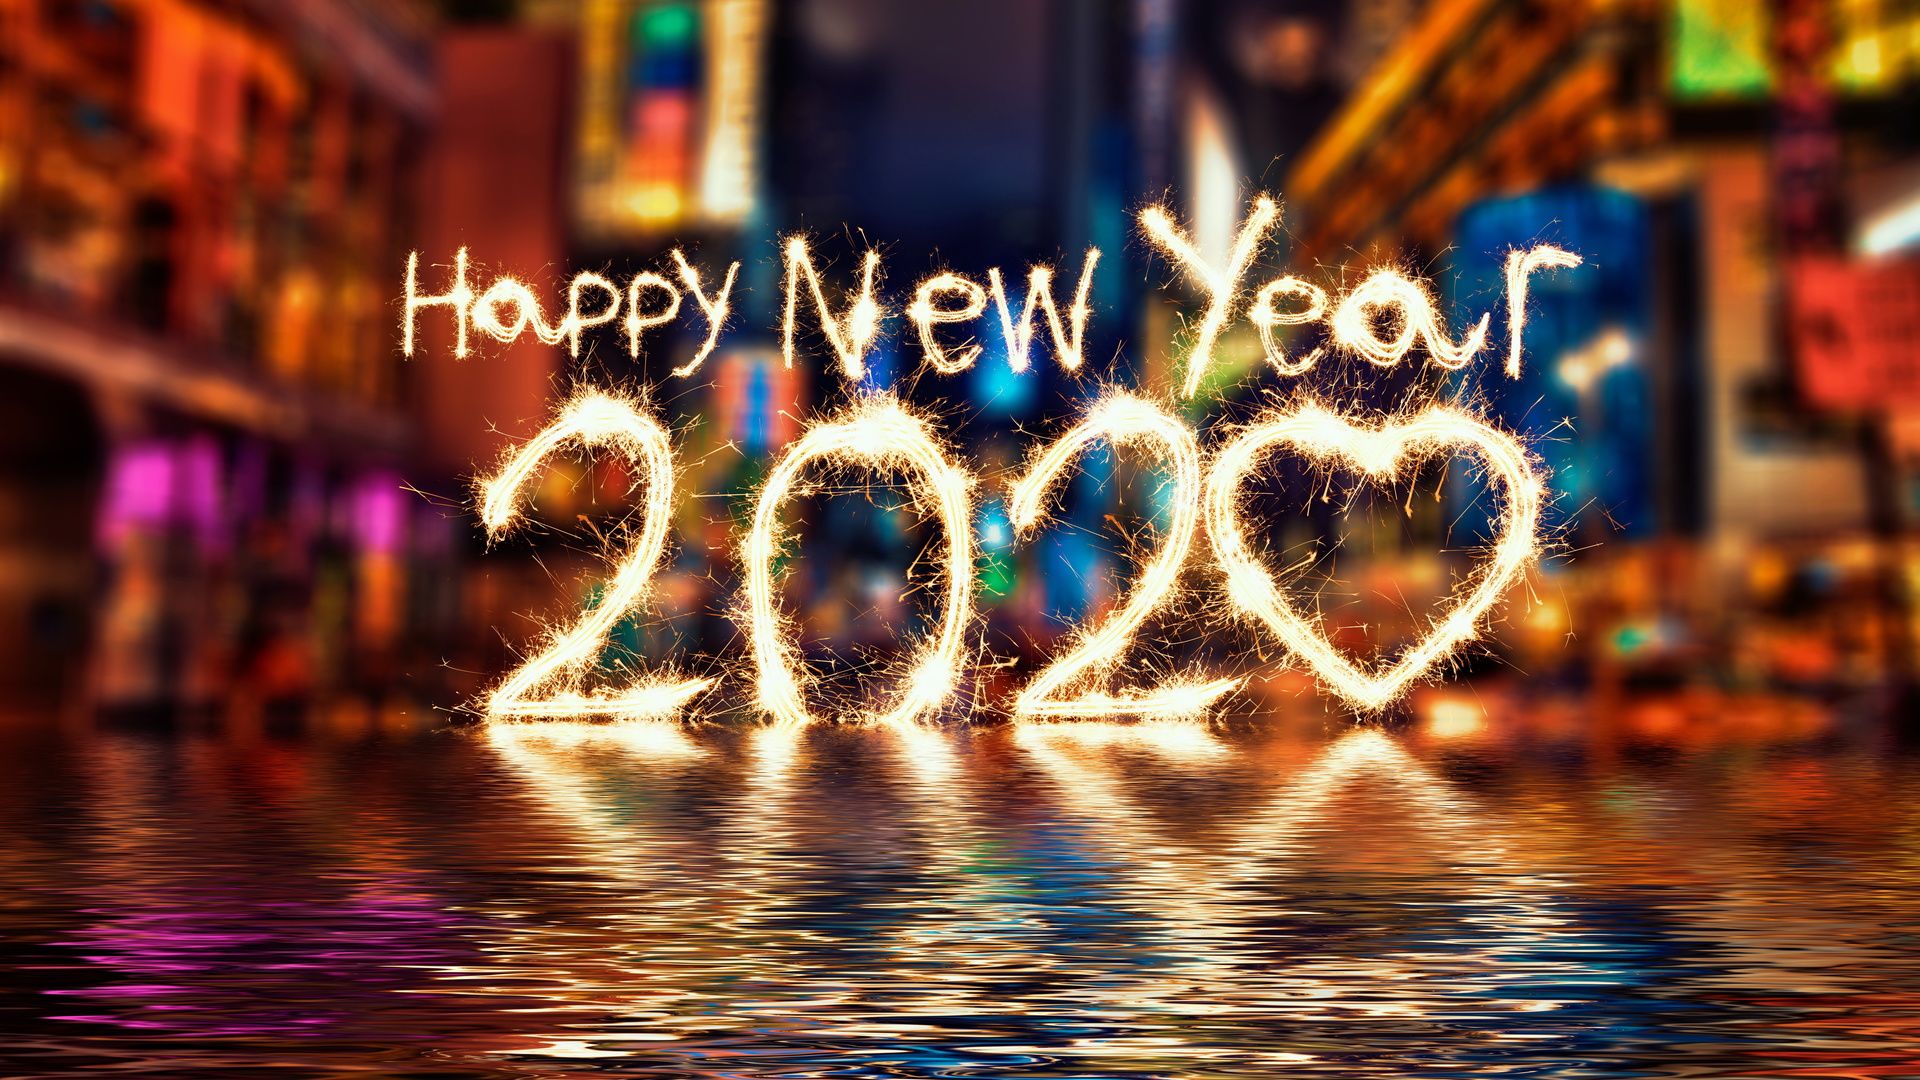 Happy New Year 2020 Wallpapers 30 images   WallpaperBoat 1920x1080